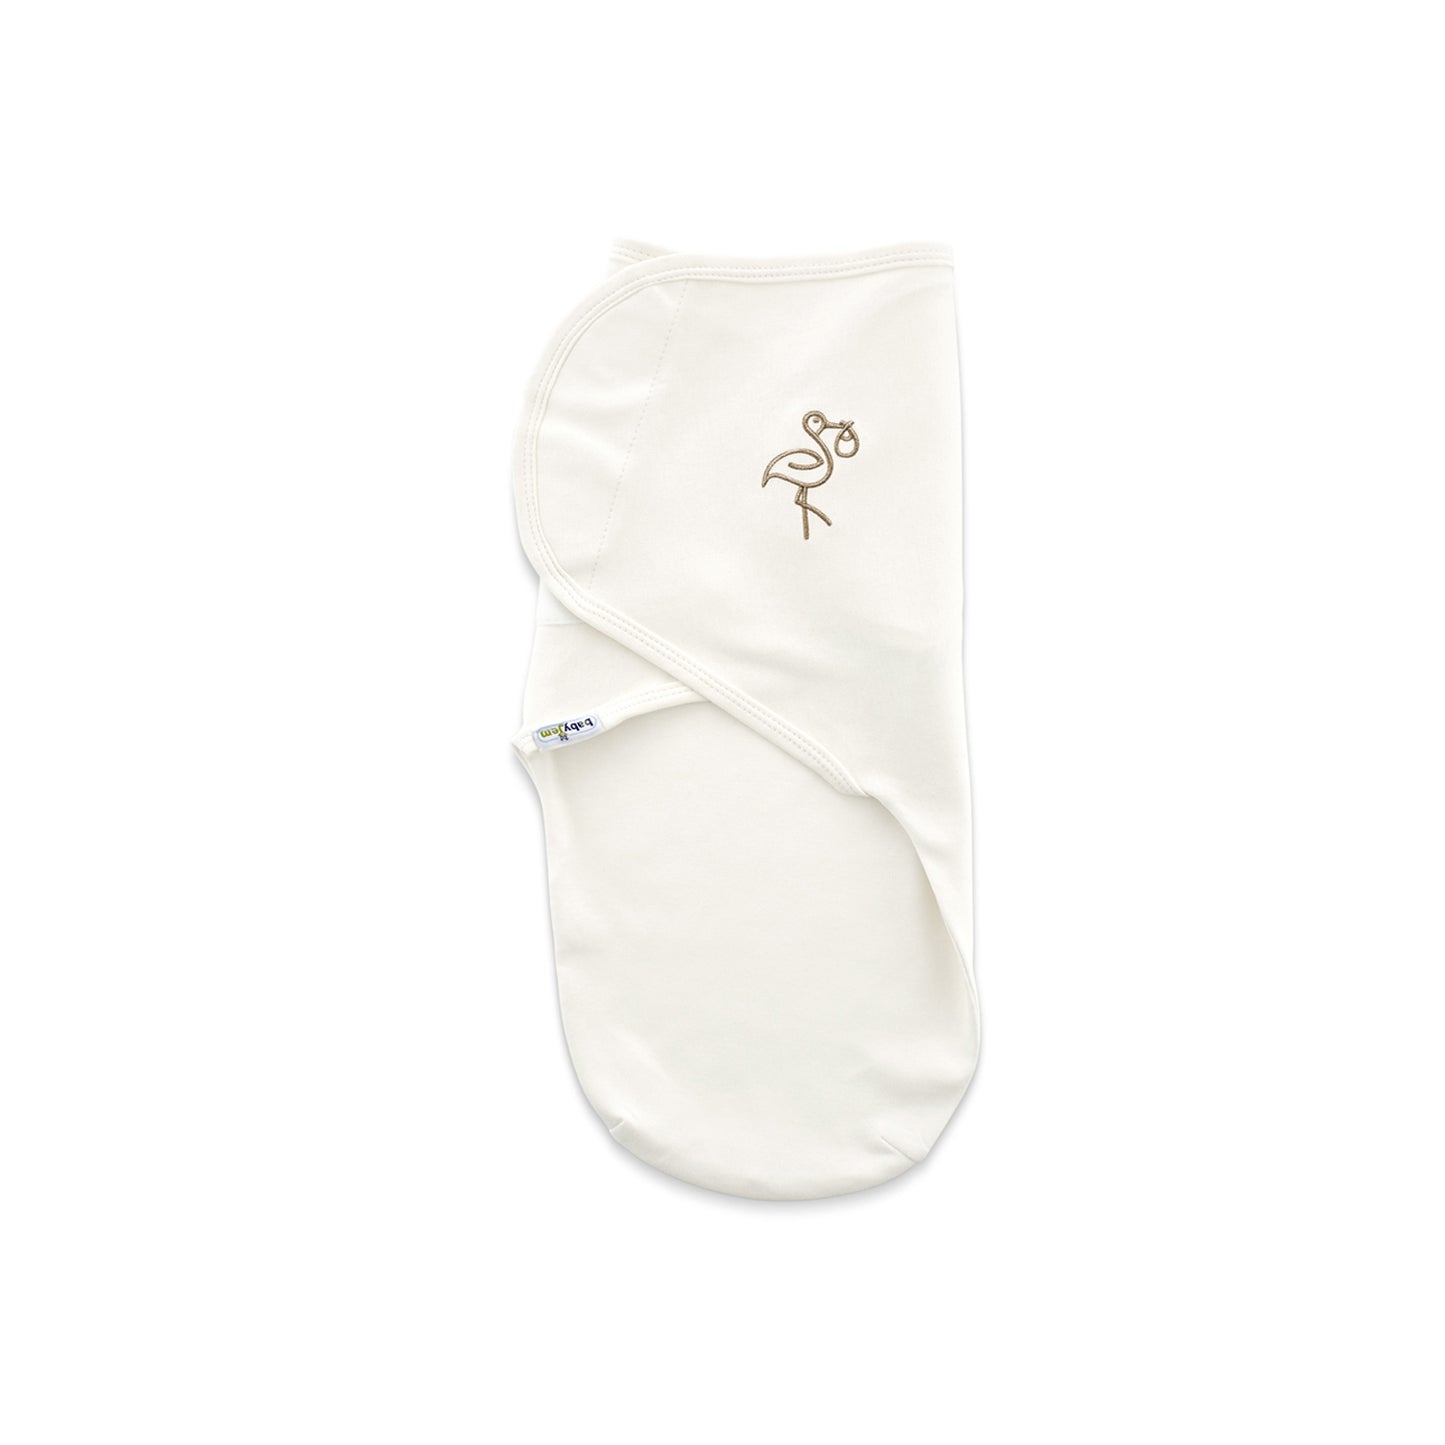 Cotton Swaddle-catbabygear, Comfort, Comfortable, Easy, Off-White, Safe, Sleep, Swaddle, Warm, Warmth, Wrap-Babyjem-[Too Twee]-[Tootwee]-[baby]-[newborn]-[clothes]-[essentials]-[toys]-[Lebanon]